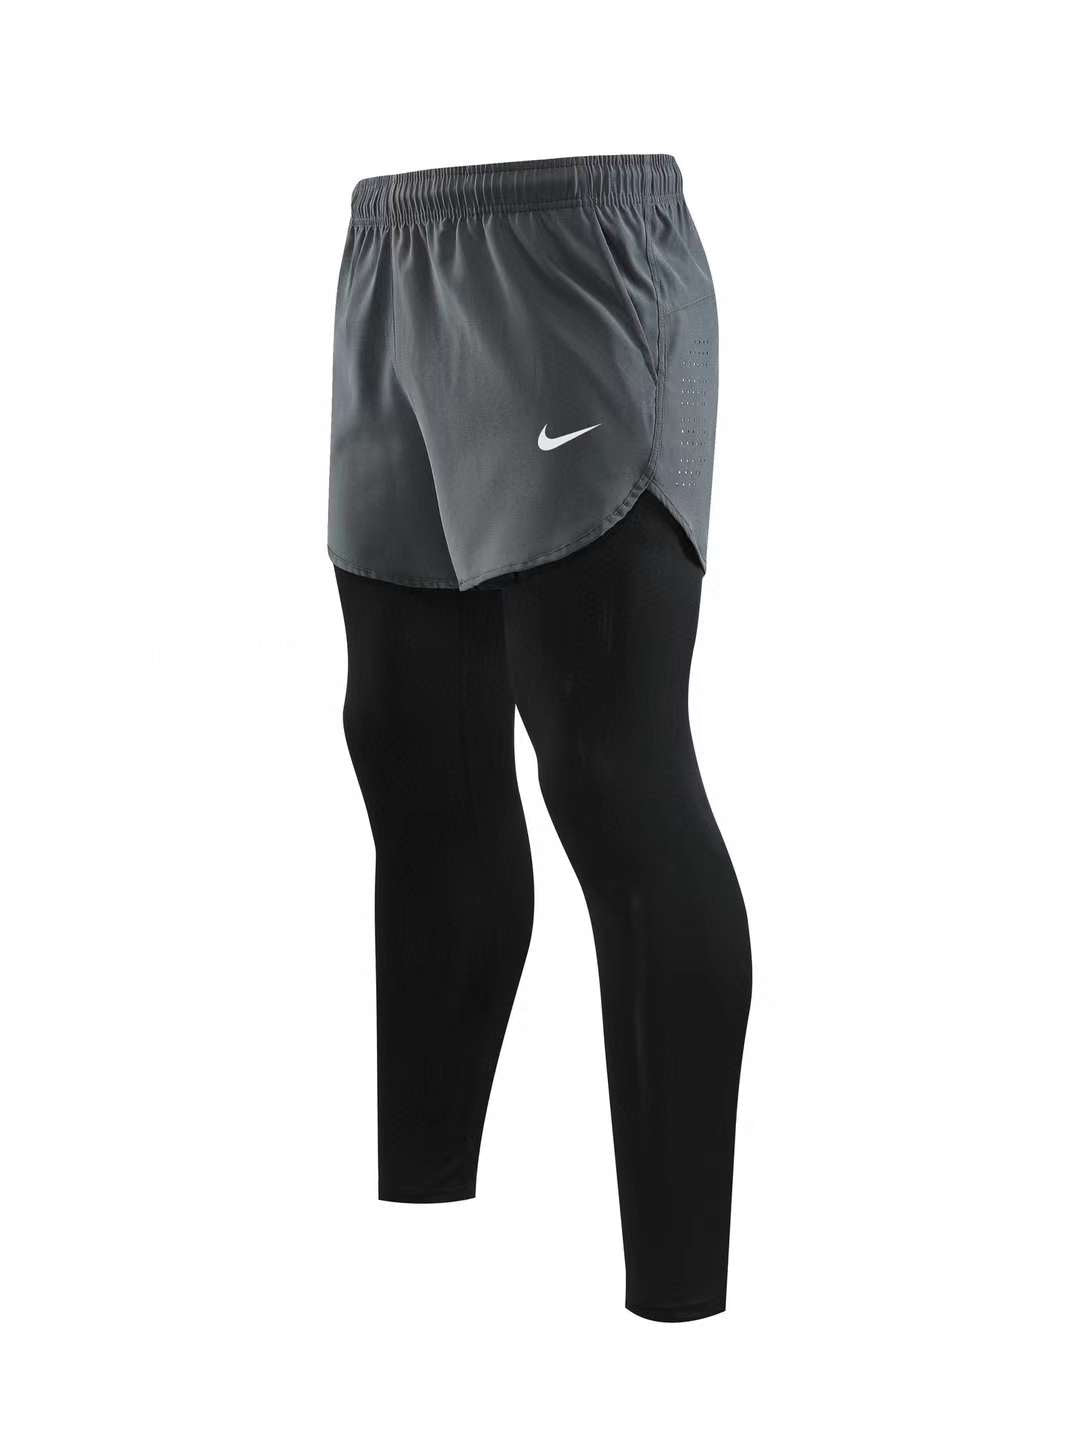 Nike Tights Shorts - Buy Nike Tights Shorts online in India